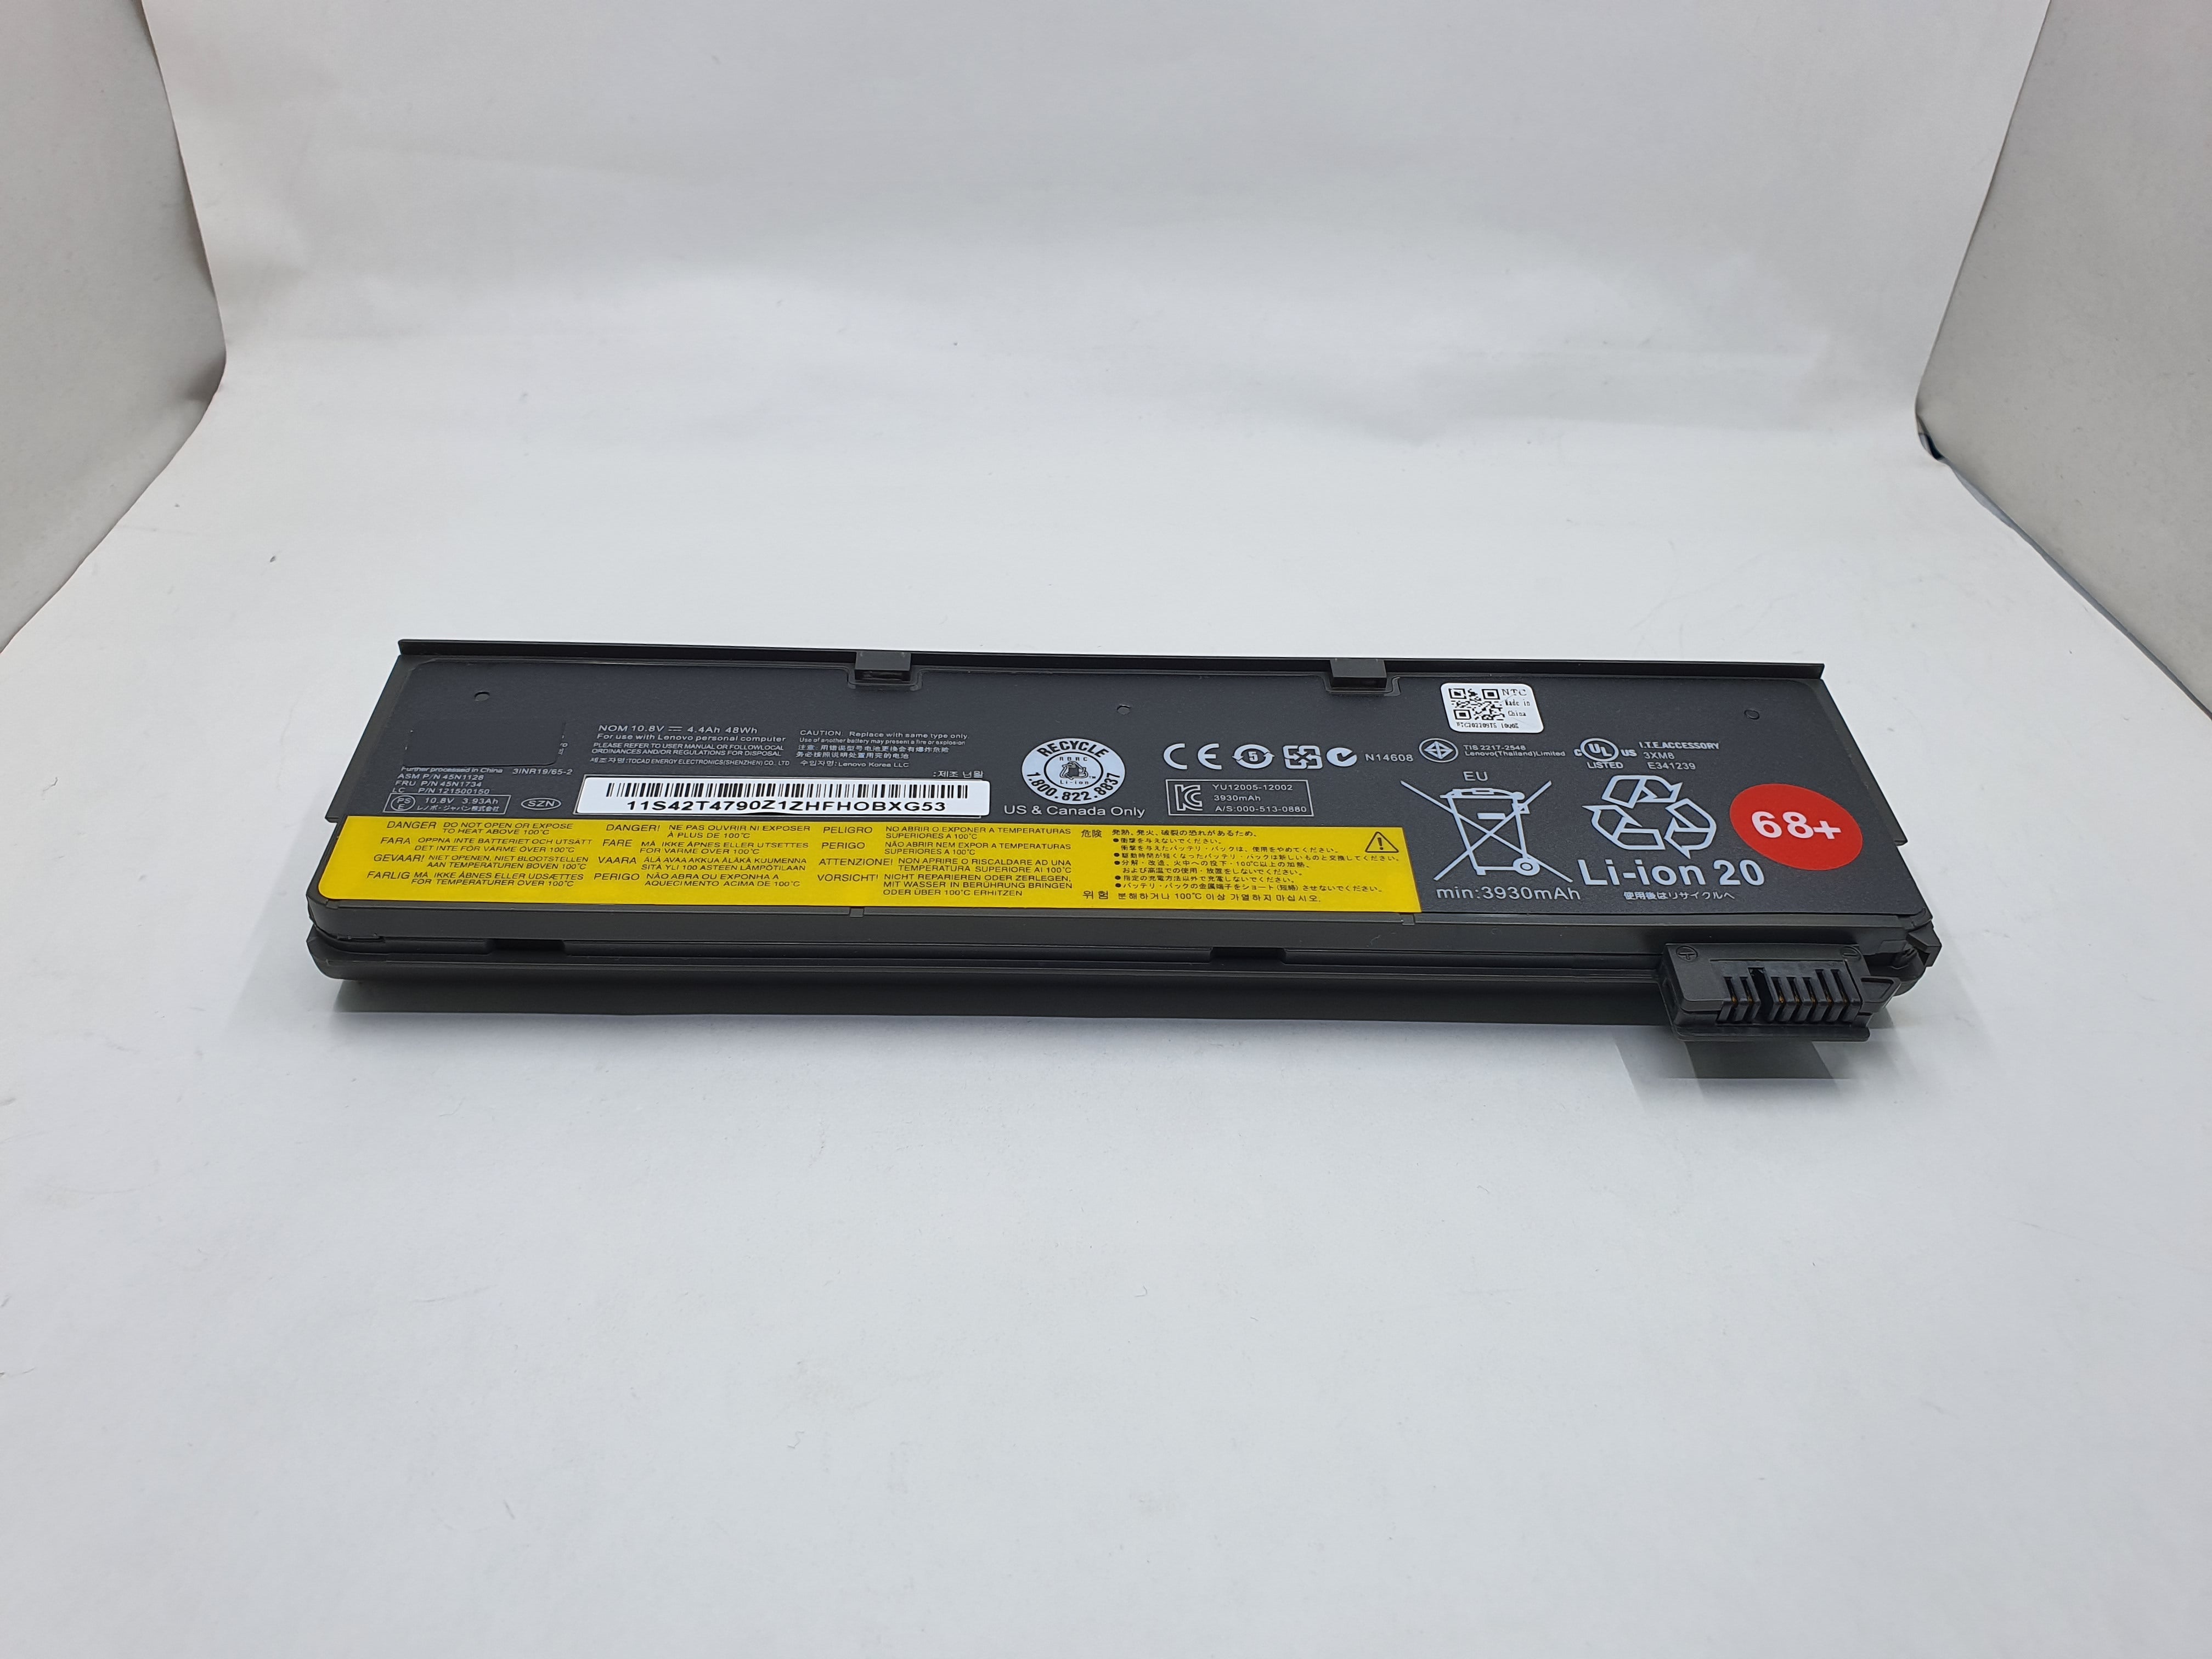 Lenovo Battery X250 WL for replacement - Thinkpad X250